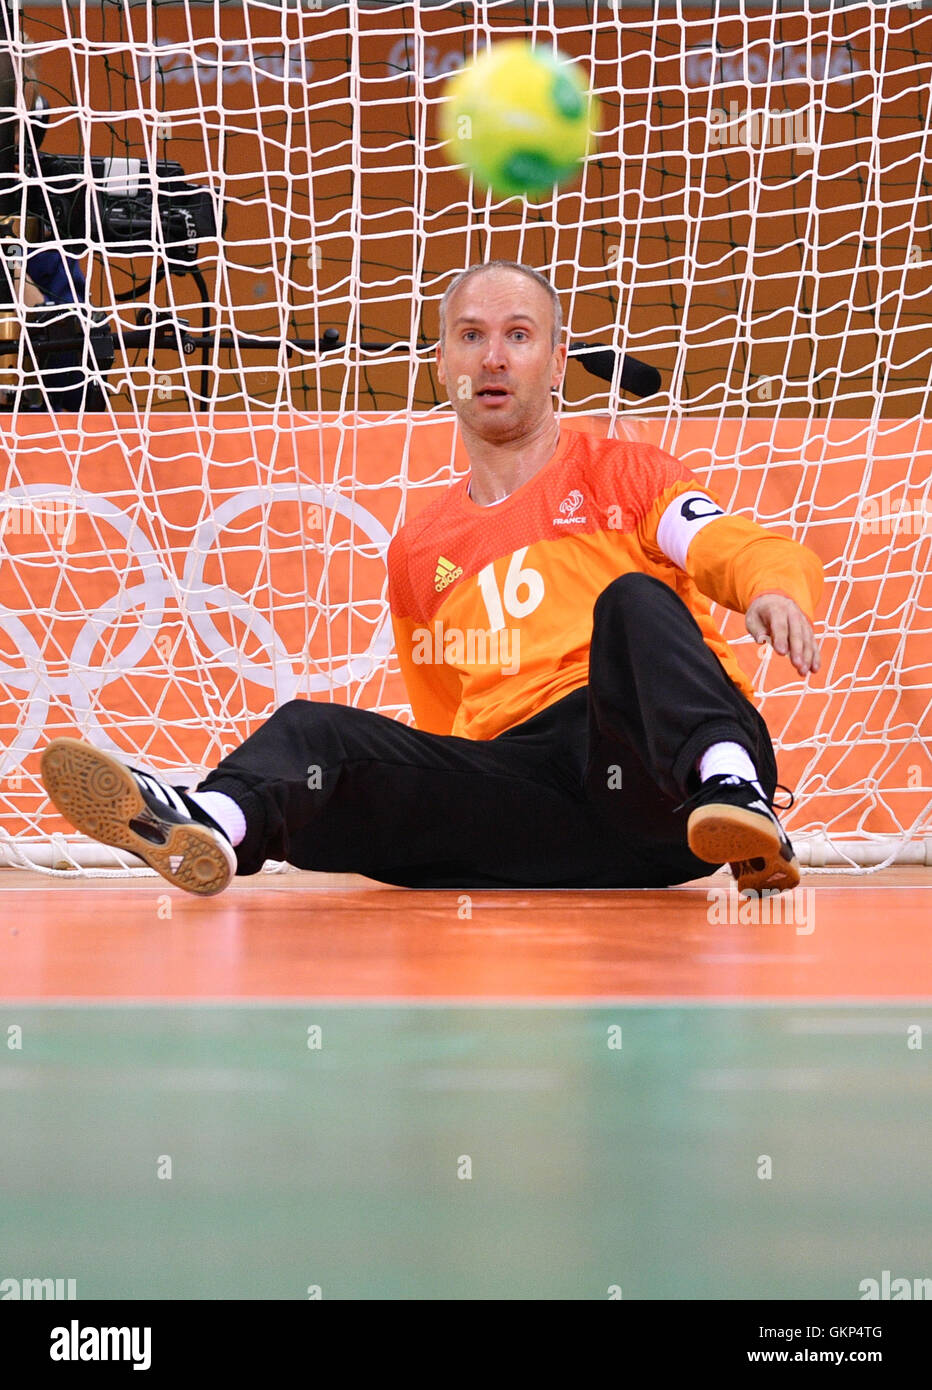 Rio de Janeiro, Brazil. 21st Aug, 2016. Goalkeeper Thierry Omeyer of France reacts during the Men's Gold Medal Match match between Denmark and France of the Handball events during the Rio 2016 Olympic Games in Rio de Janeiro, Brazil, 21 August 2016. Photo: Lukas Schulze/dpa/Alamy Live News Stock Photo